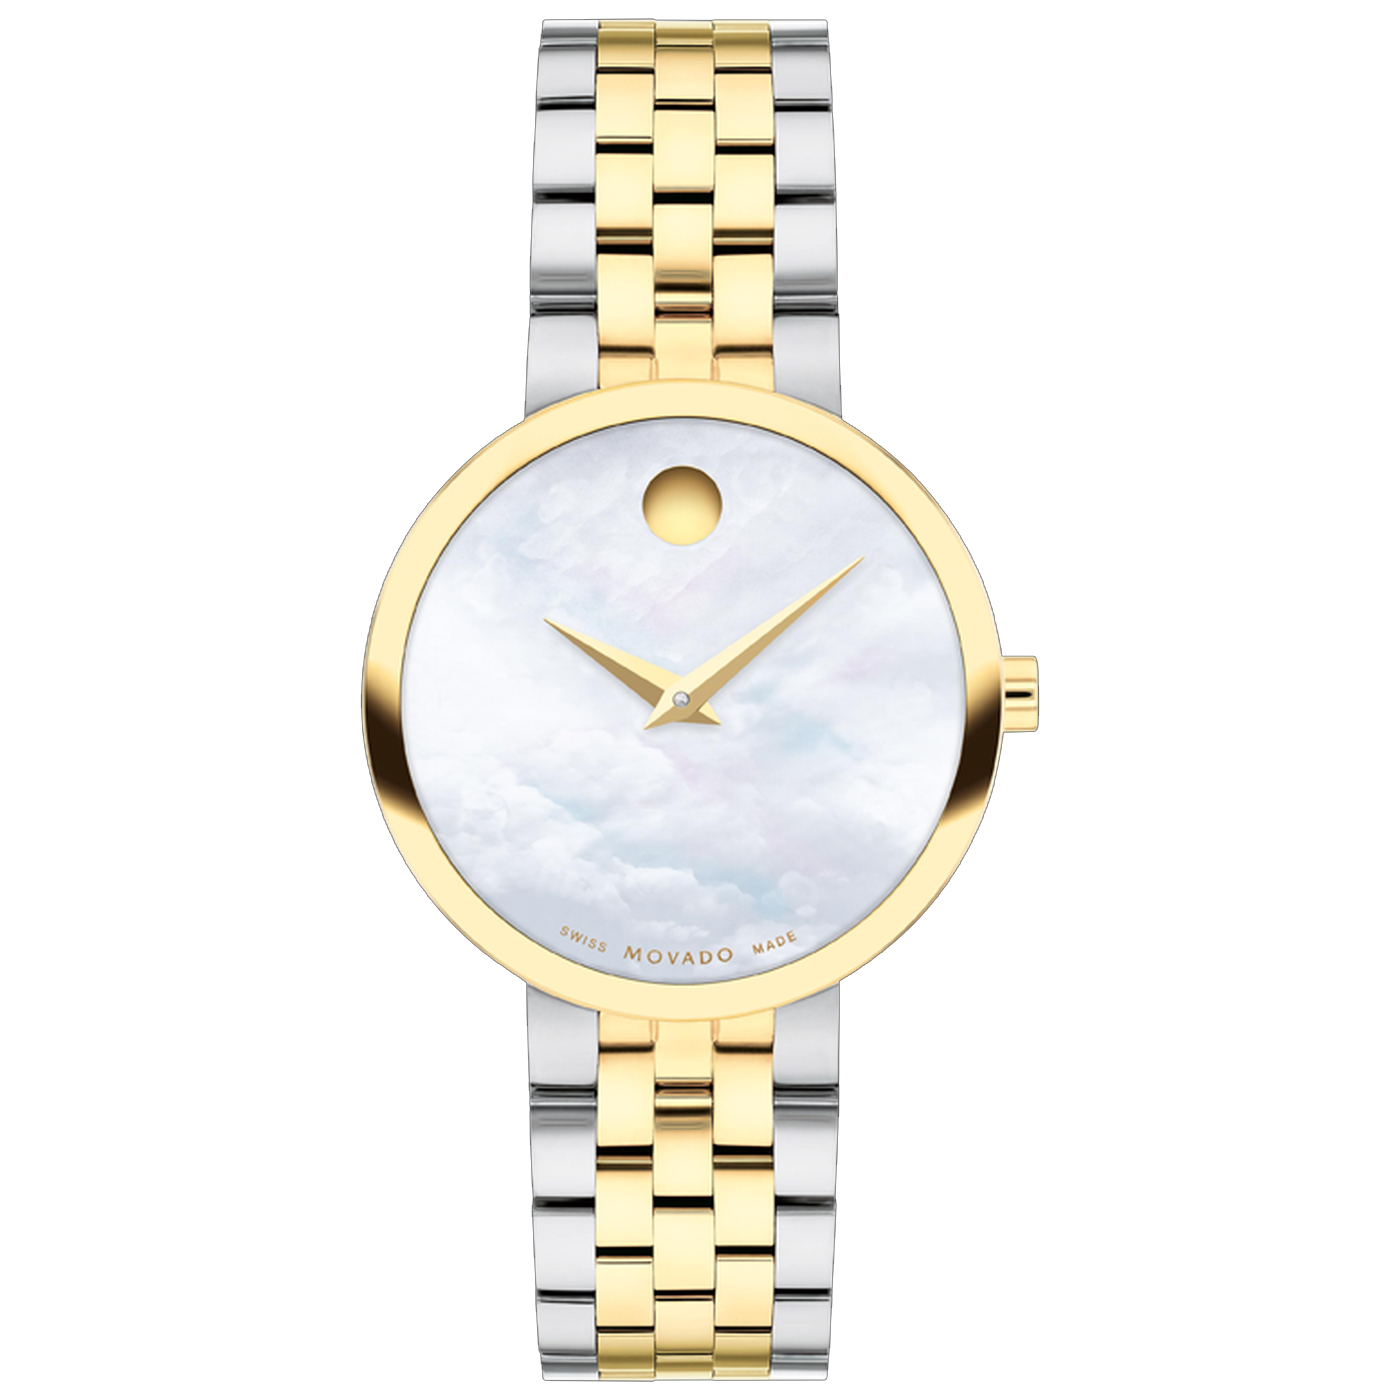 Museum Classic Mother-of-Pearl Dial Two-Tone Stainless Steel Watch 29.5mm - 0 - Movado 607812